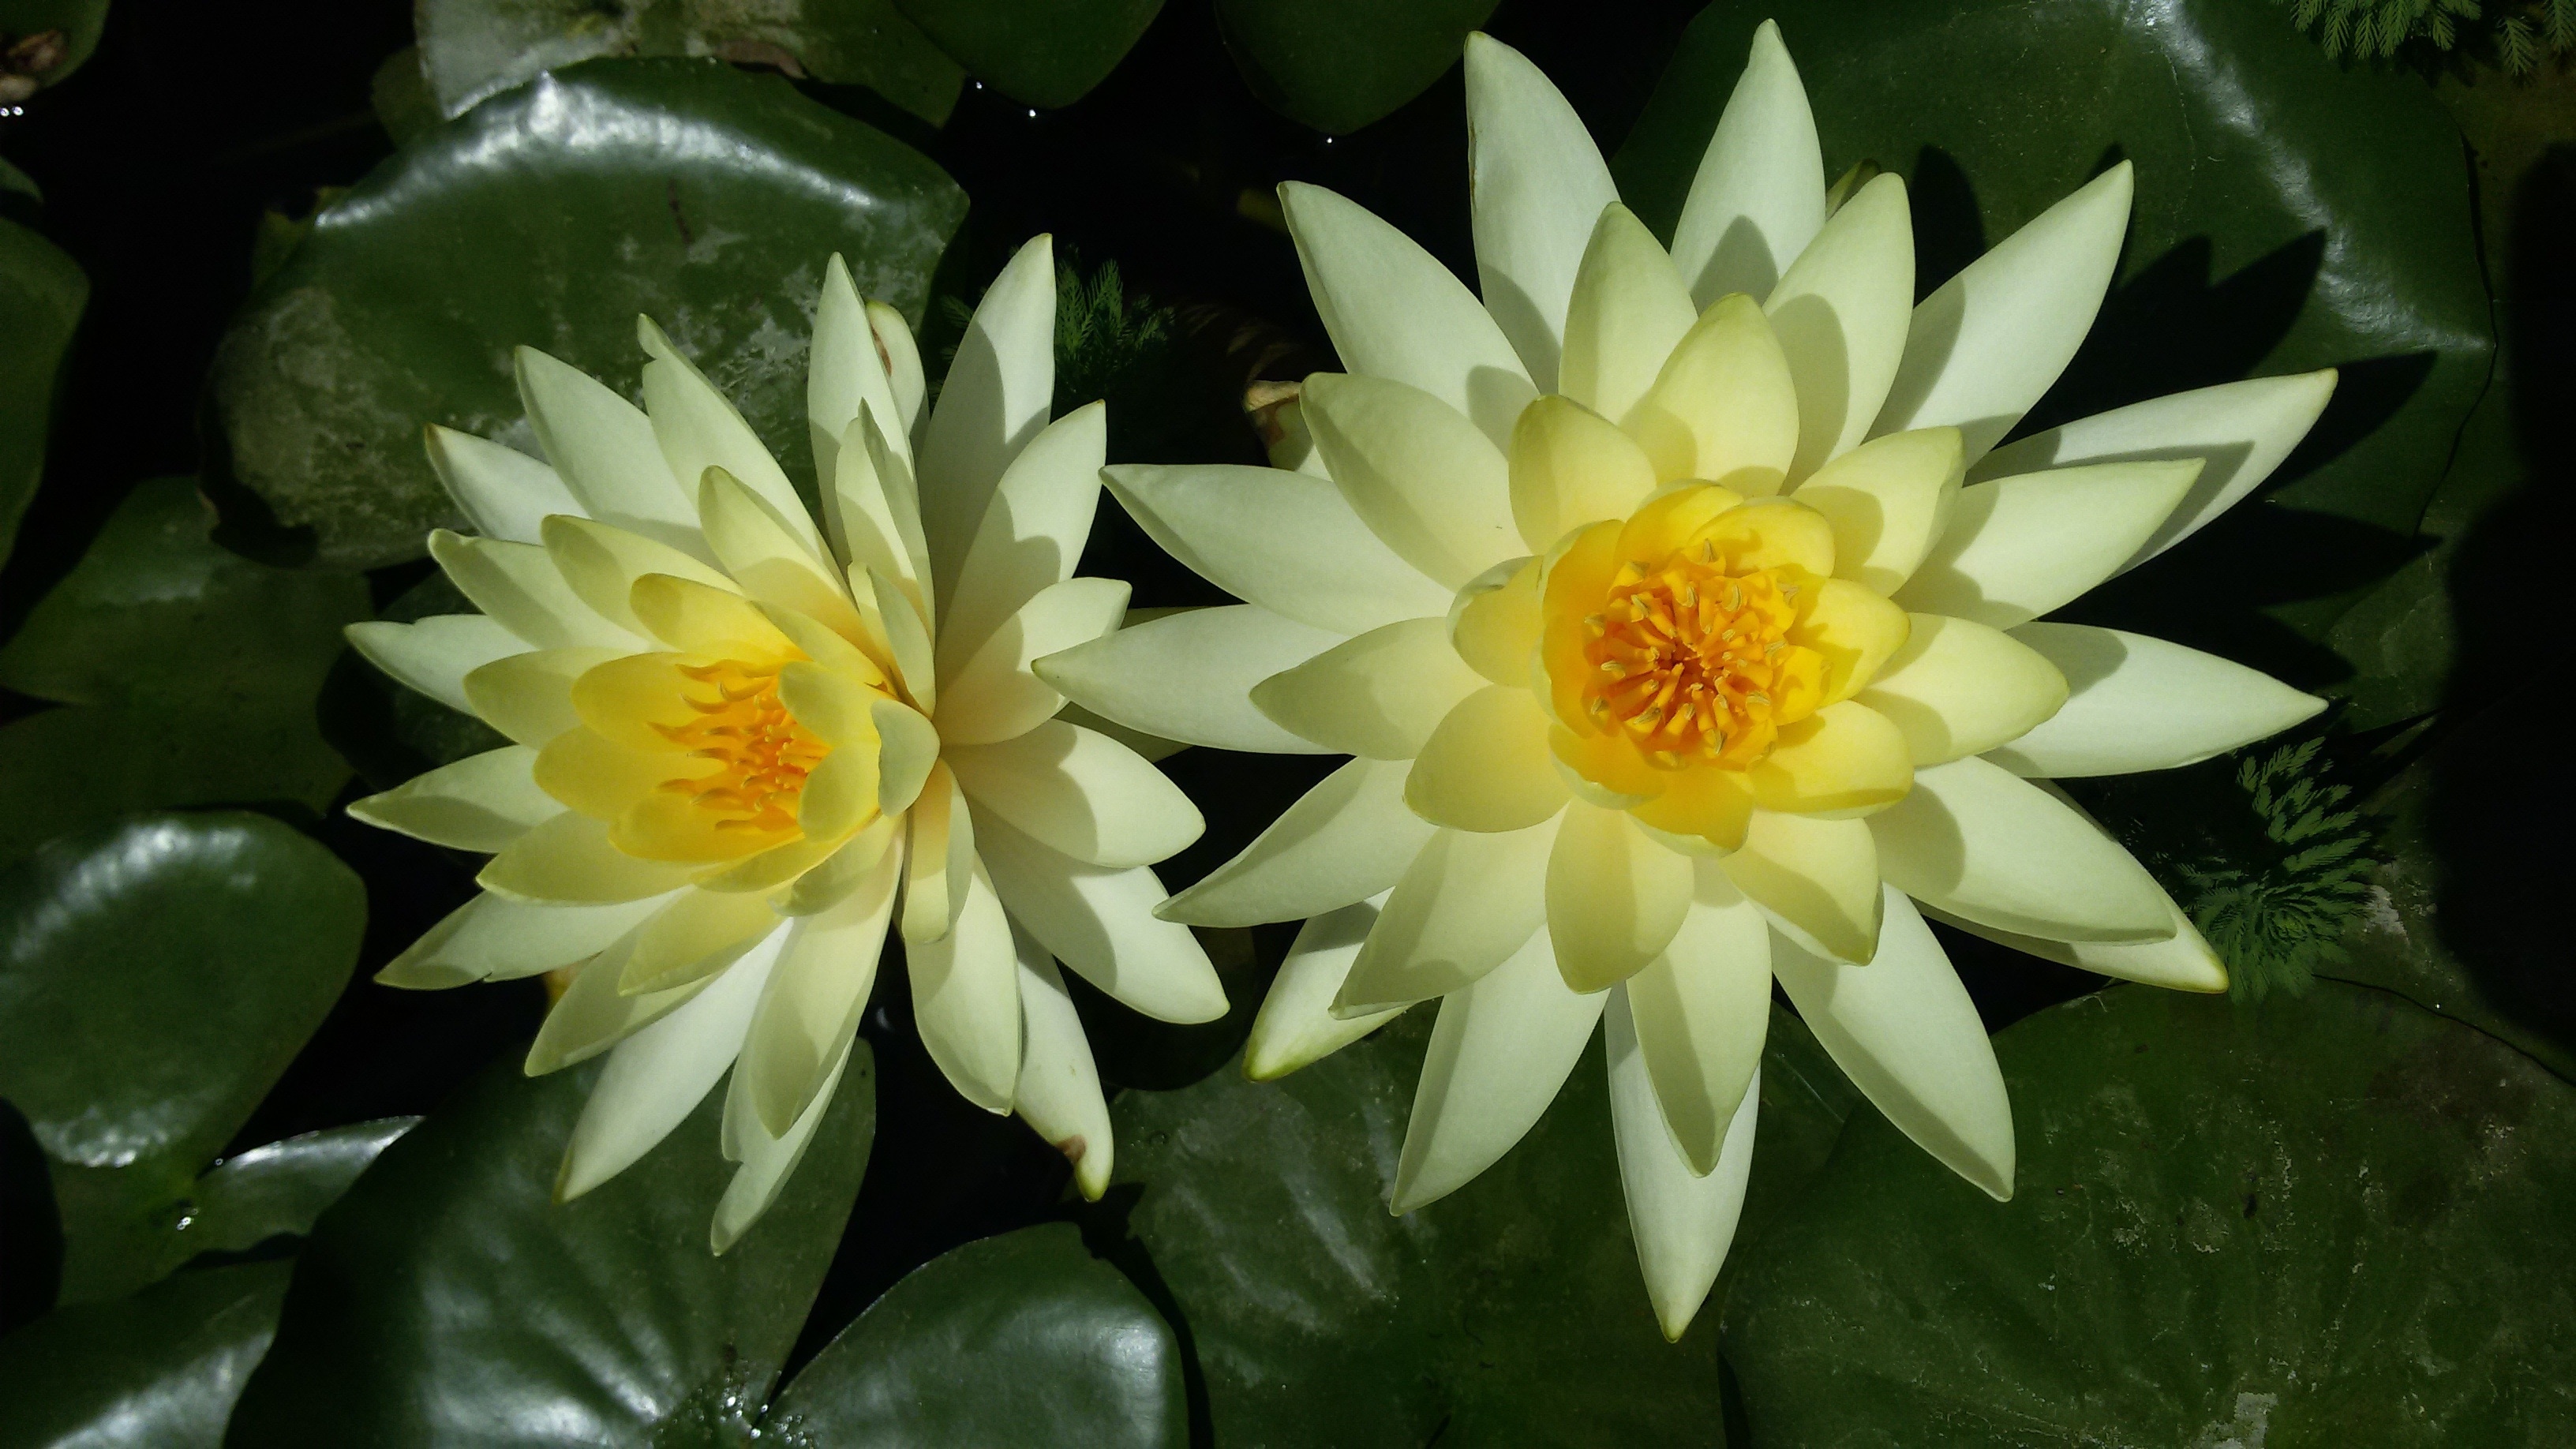 two white water lilies